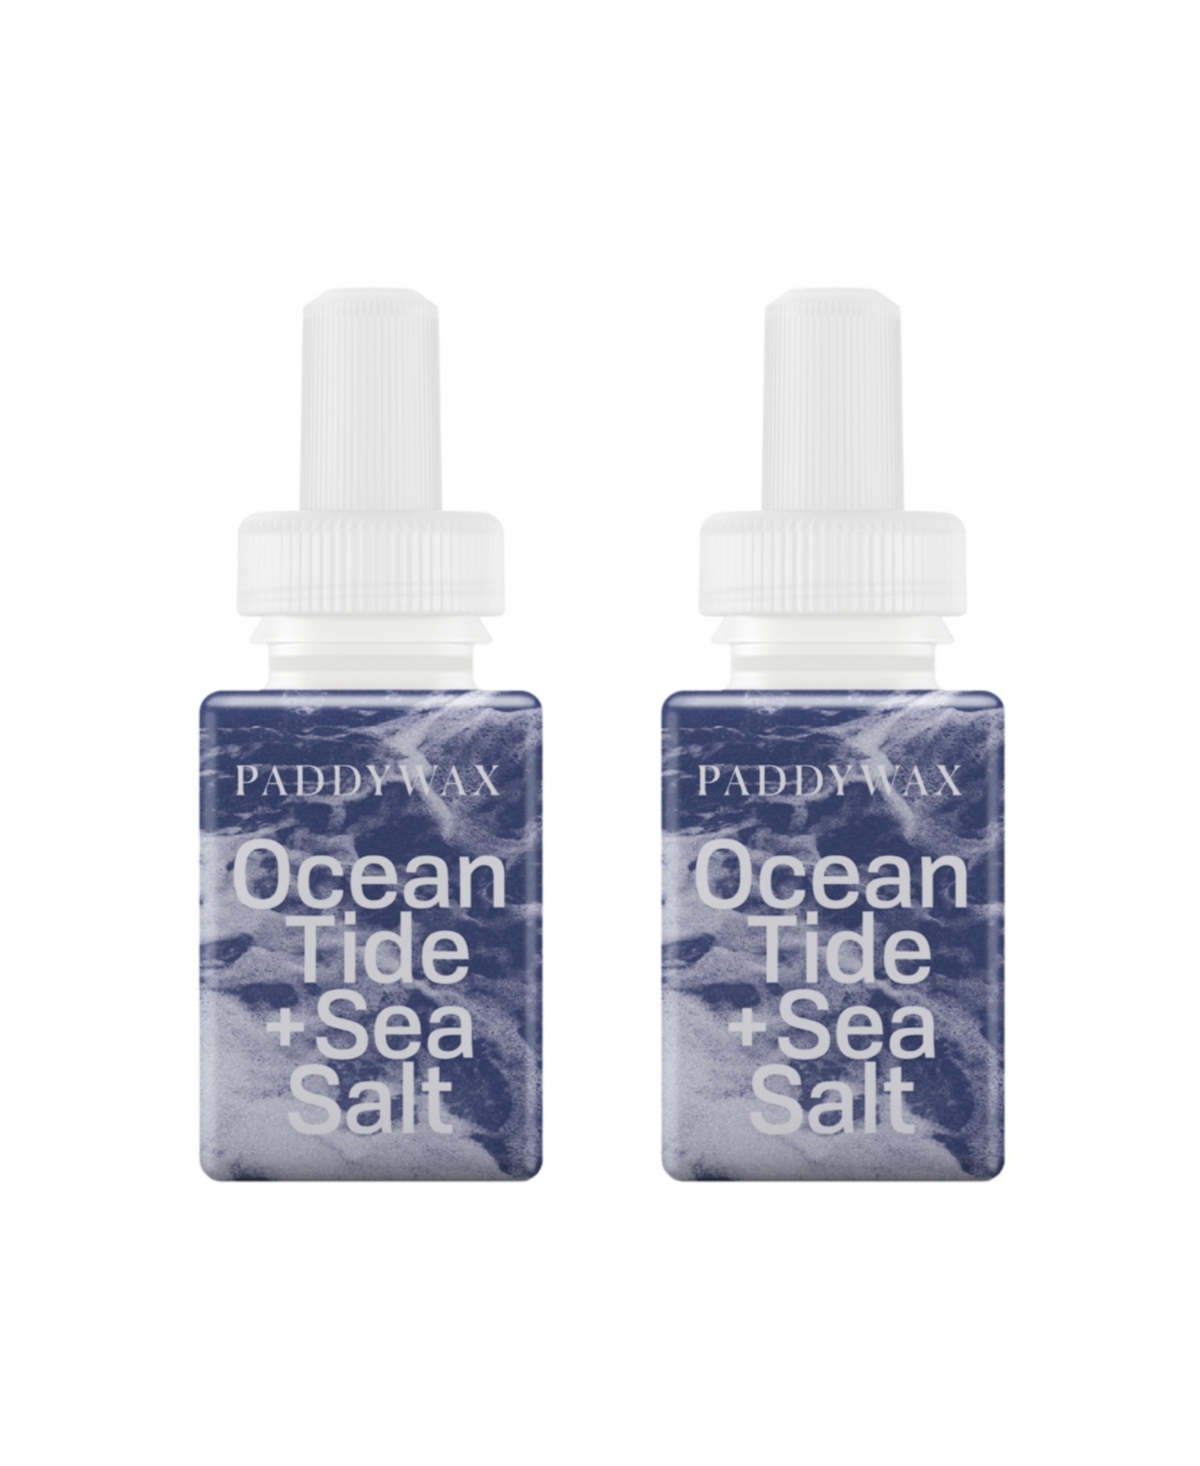 Paddywax - Ocean Tide & Sea Salt - Home Scent Refill - Smart Home Air Diffuser Fragrance - Up to 120-Hours of Luxury Fragrance per Refill - House